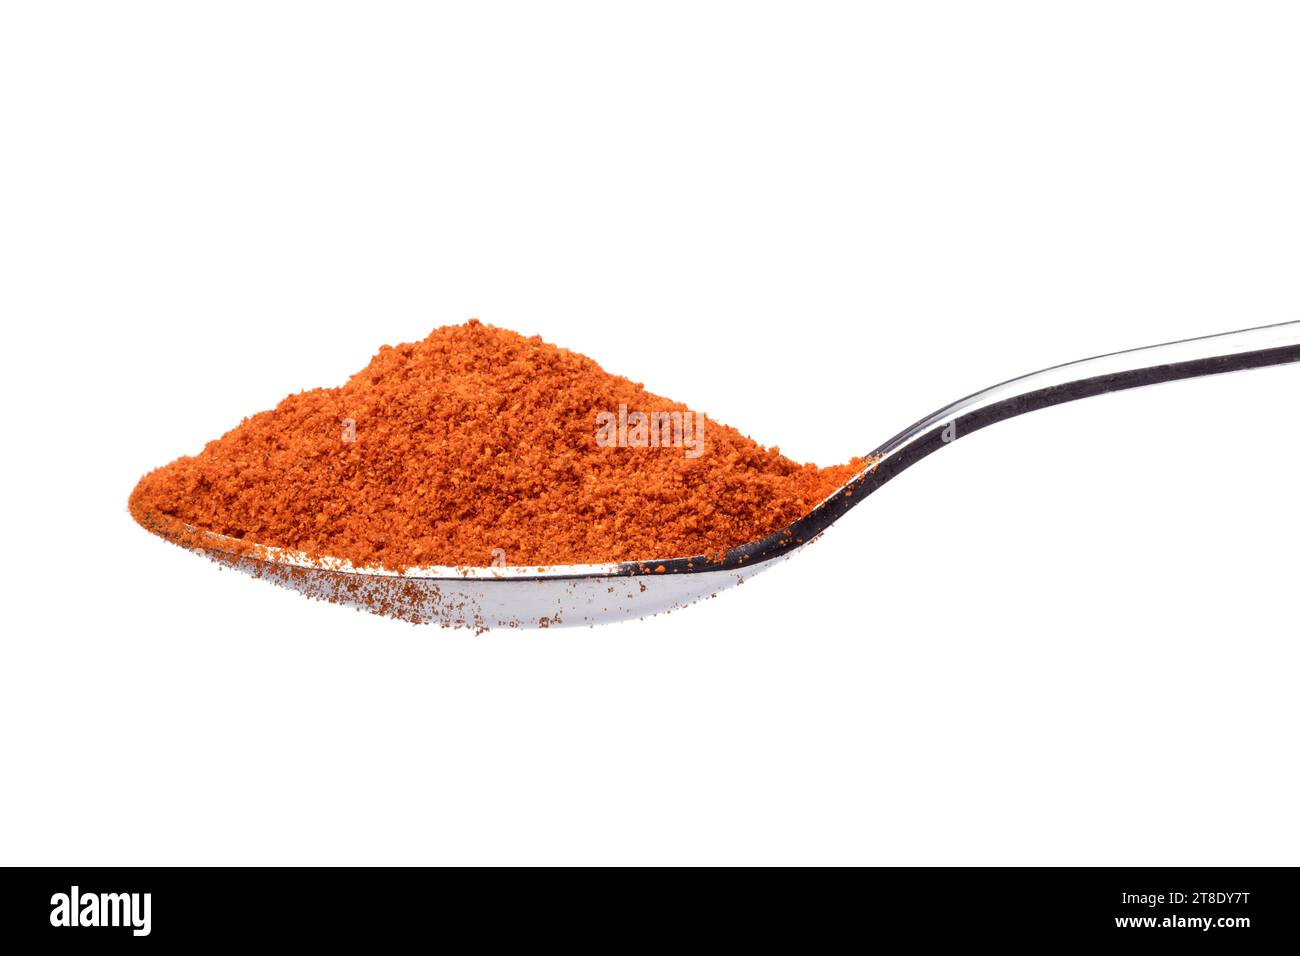 Single metal spoon with ground red pepper paprika powder on white background close up Stock Photo